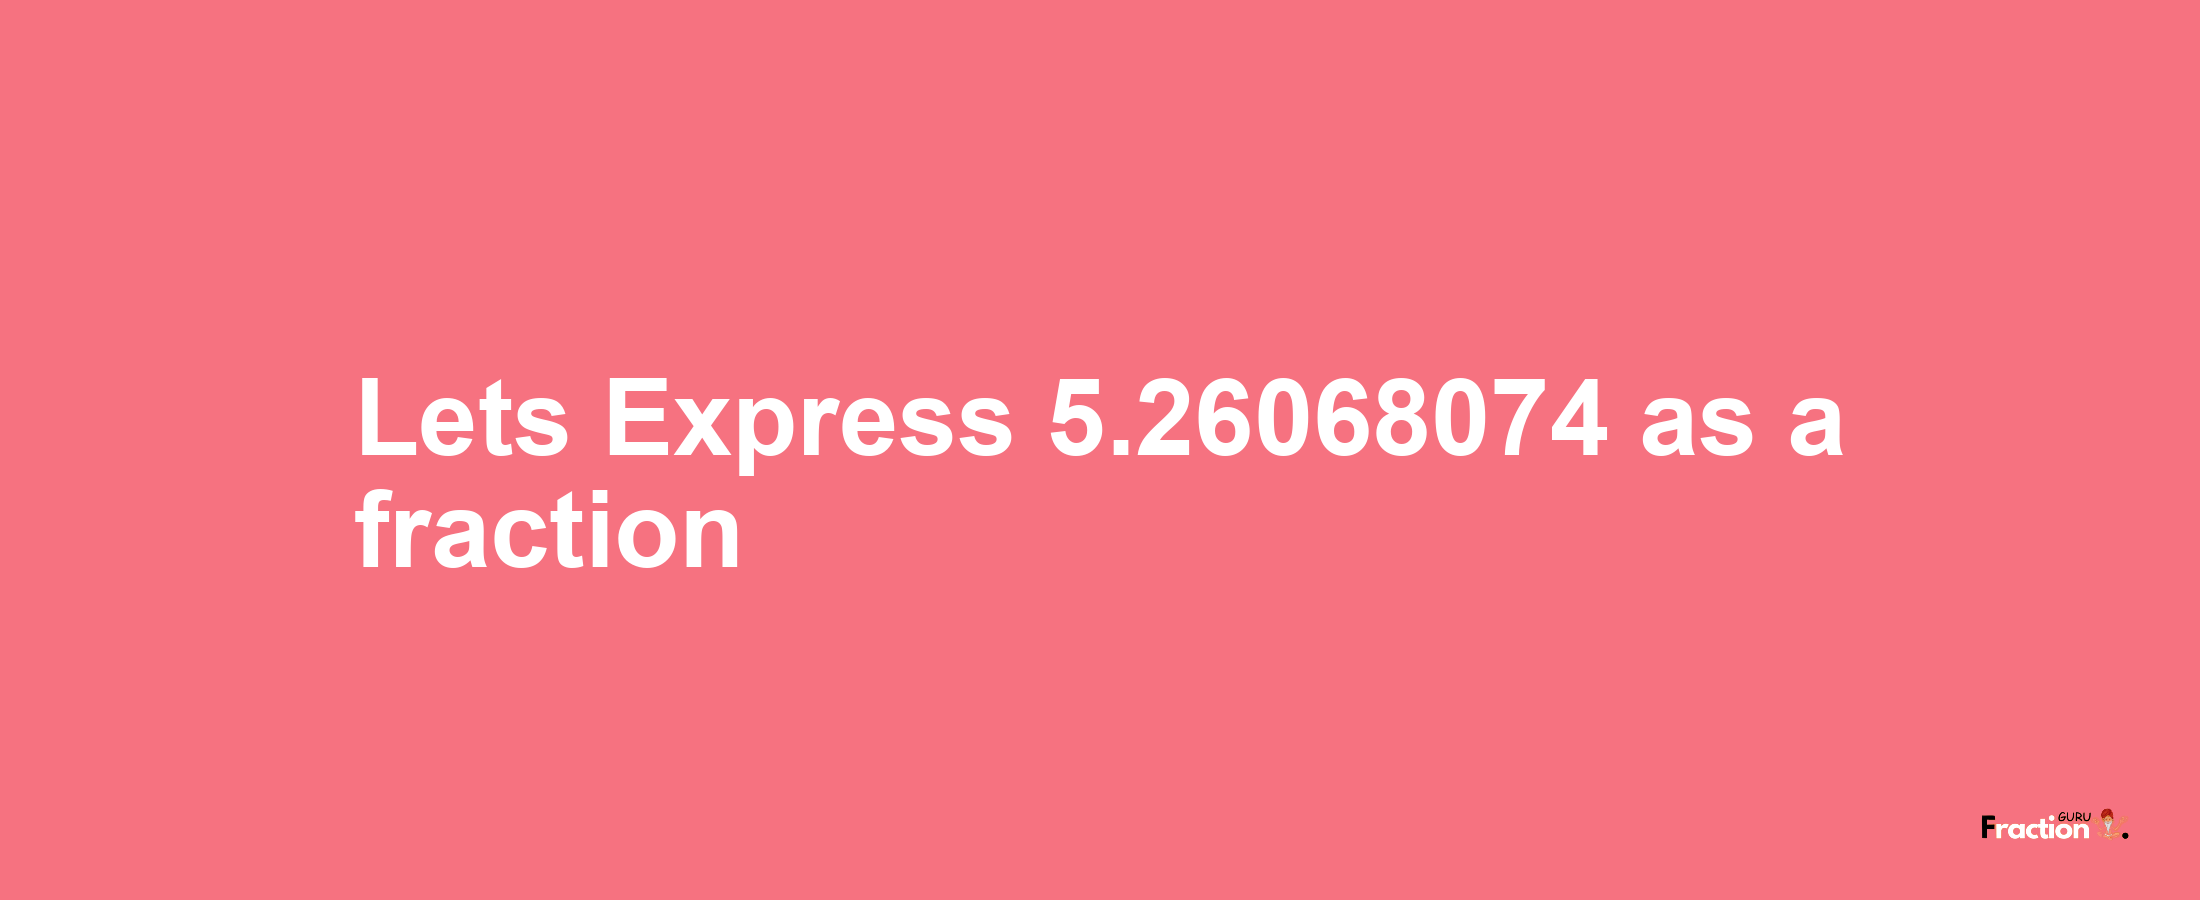 Lets Express 5.26068074 as afraction